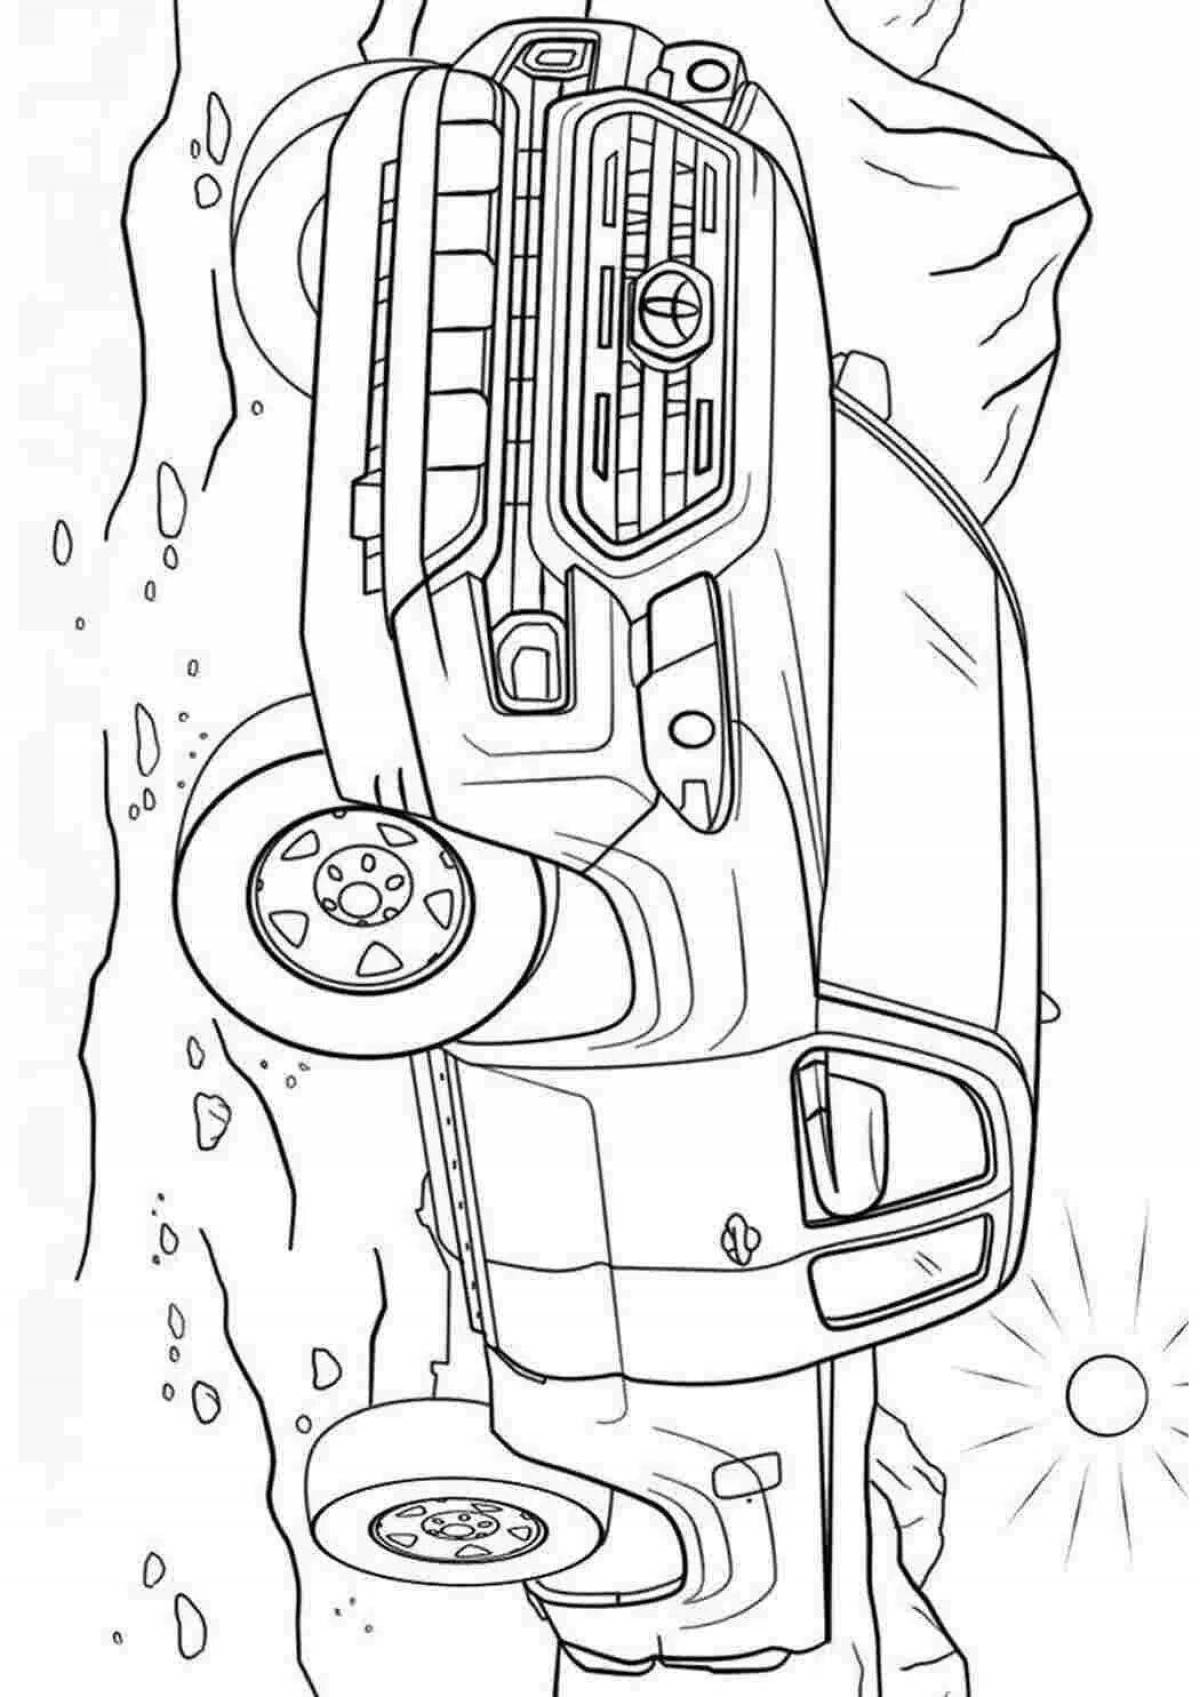 Toyota funny tundra coloring book